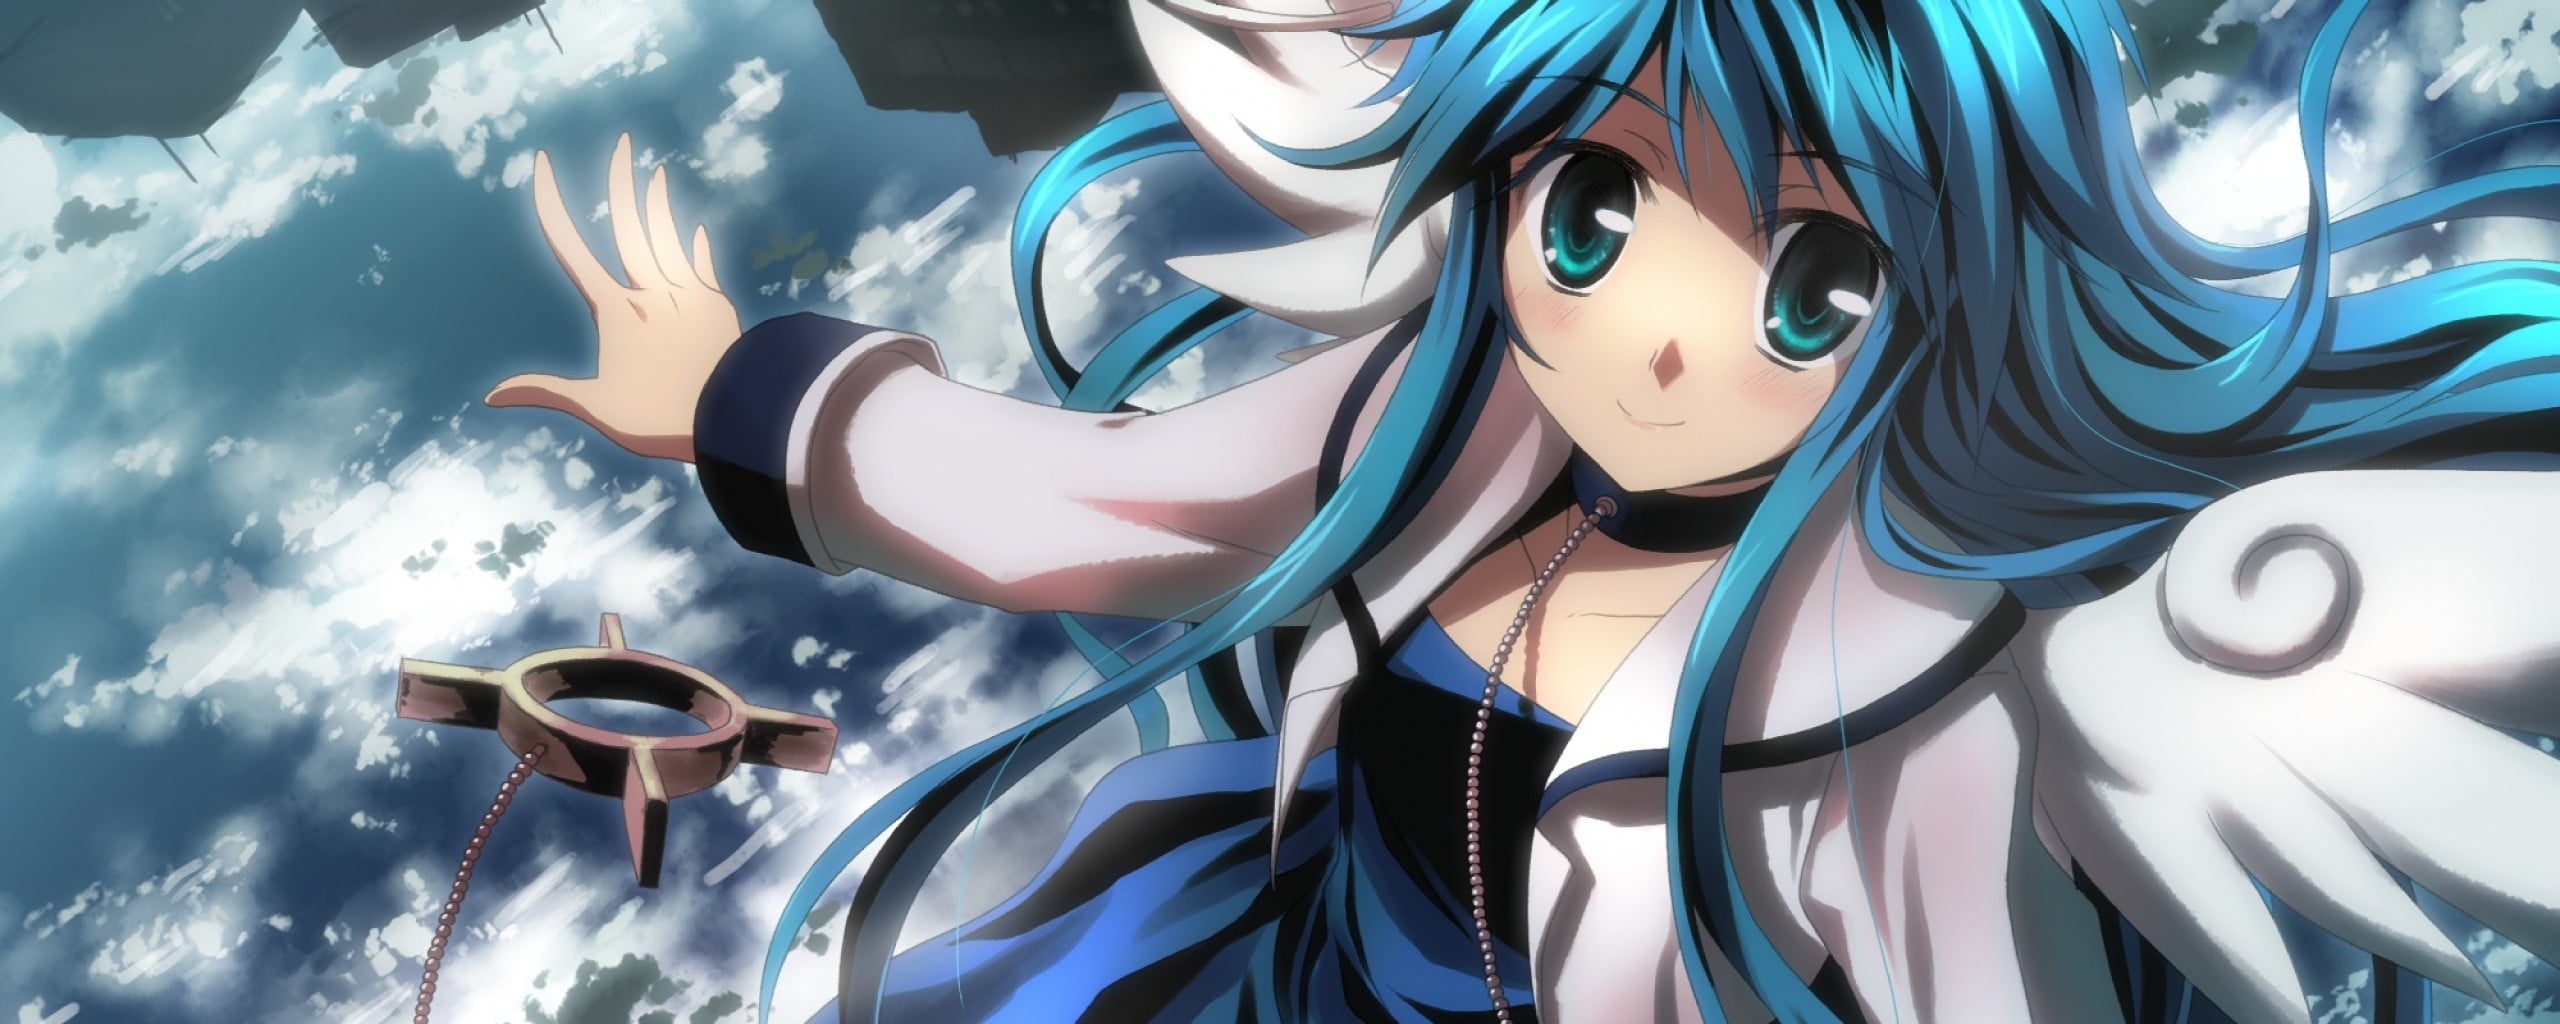 Anime Characters with Blue Hair and Heavenly Auras - wide 3